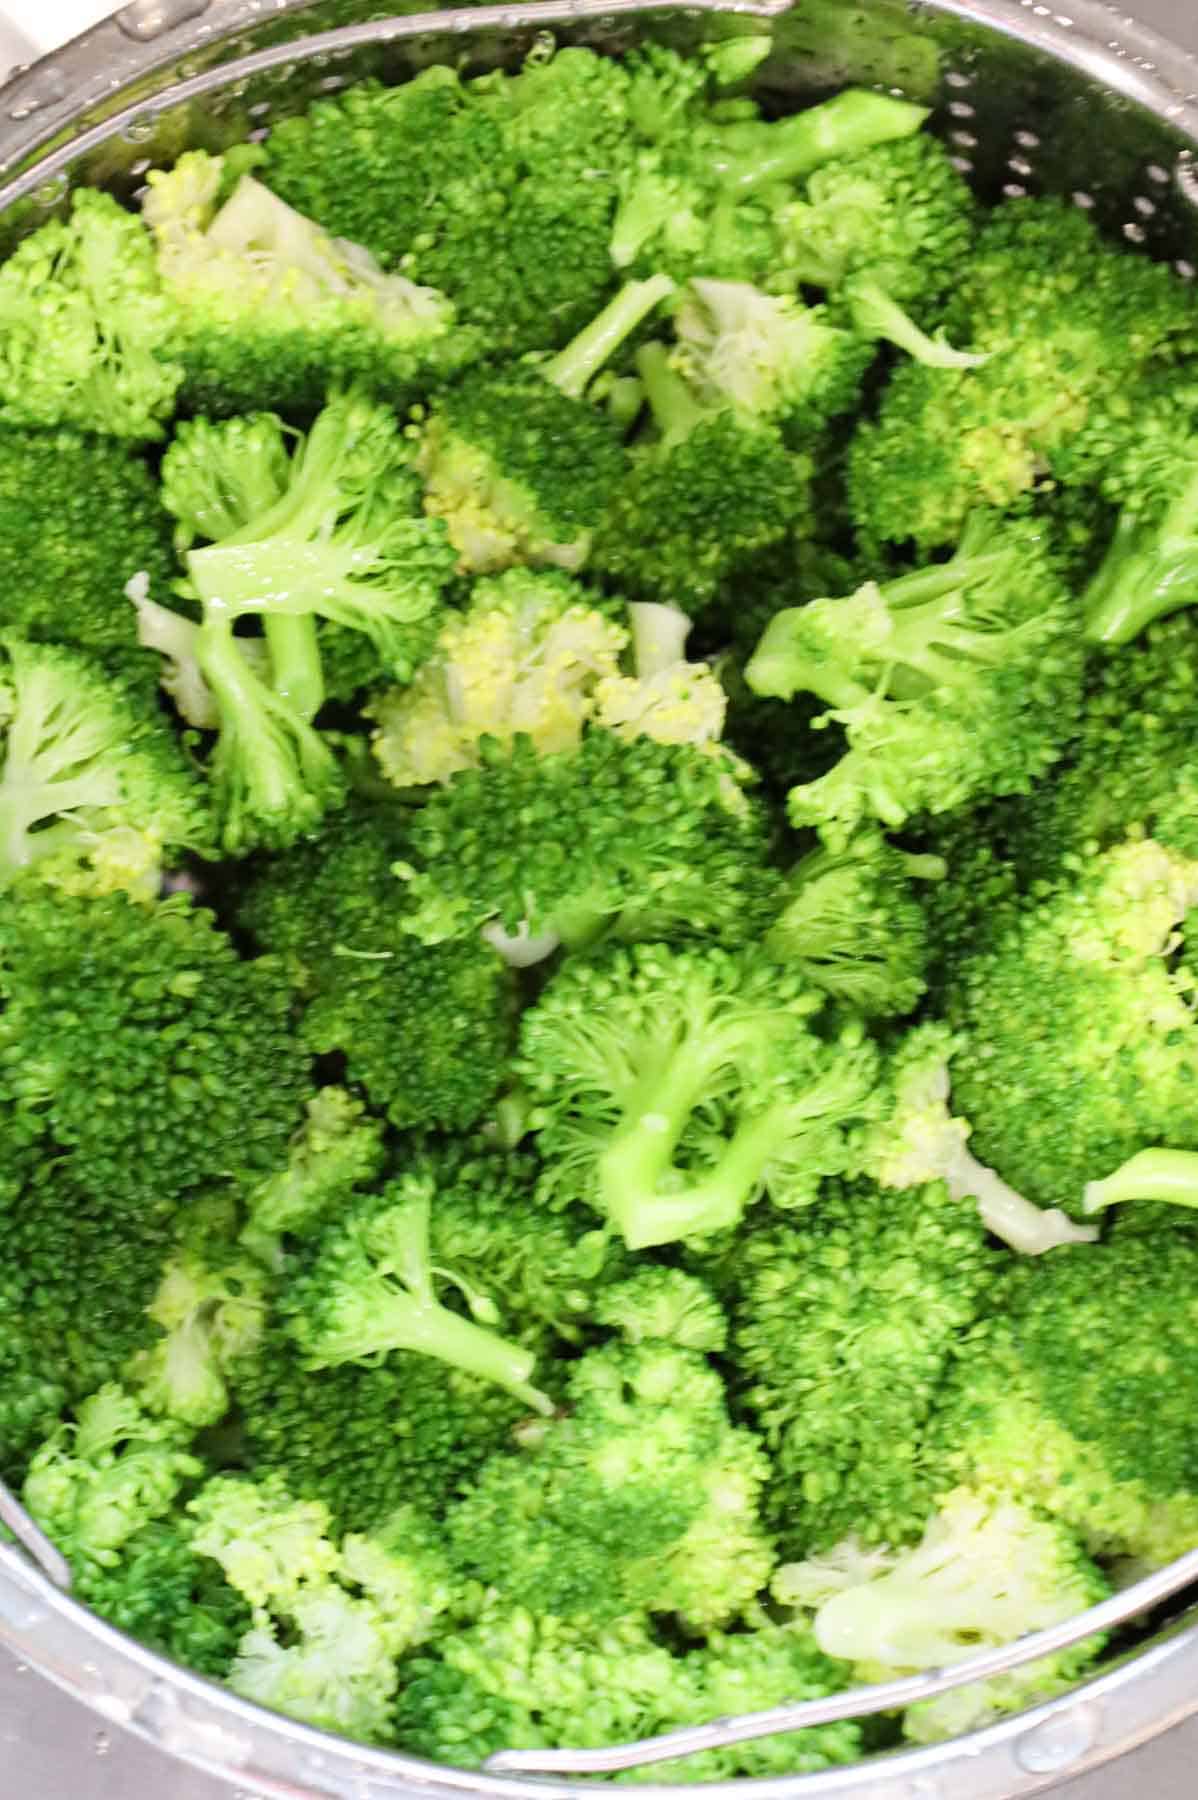 blanched broccoli after draining